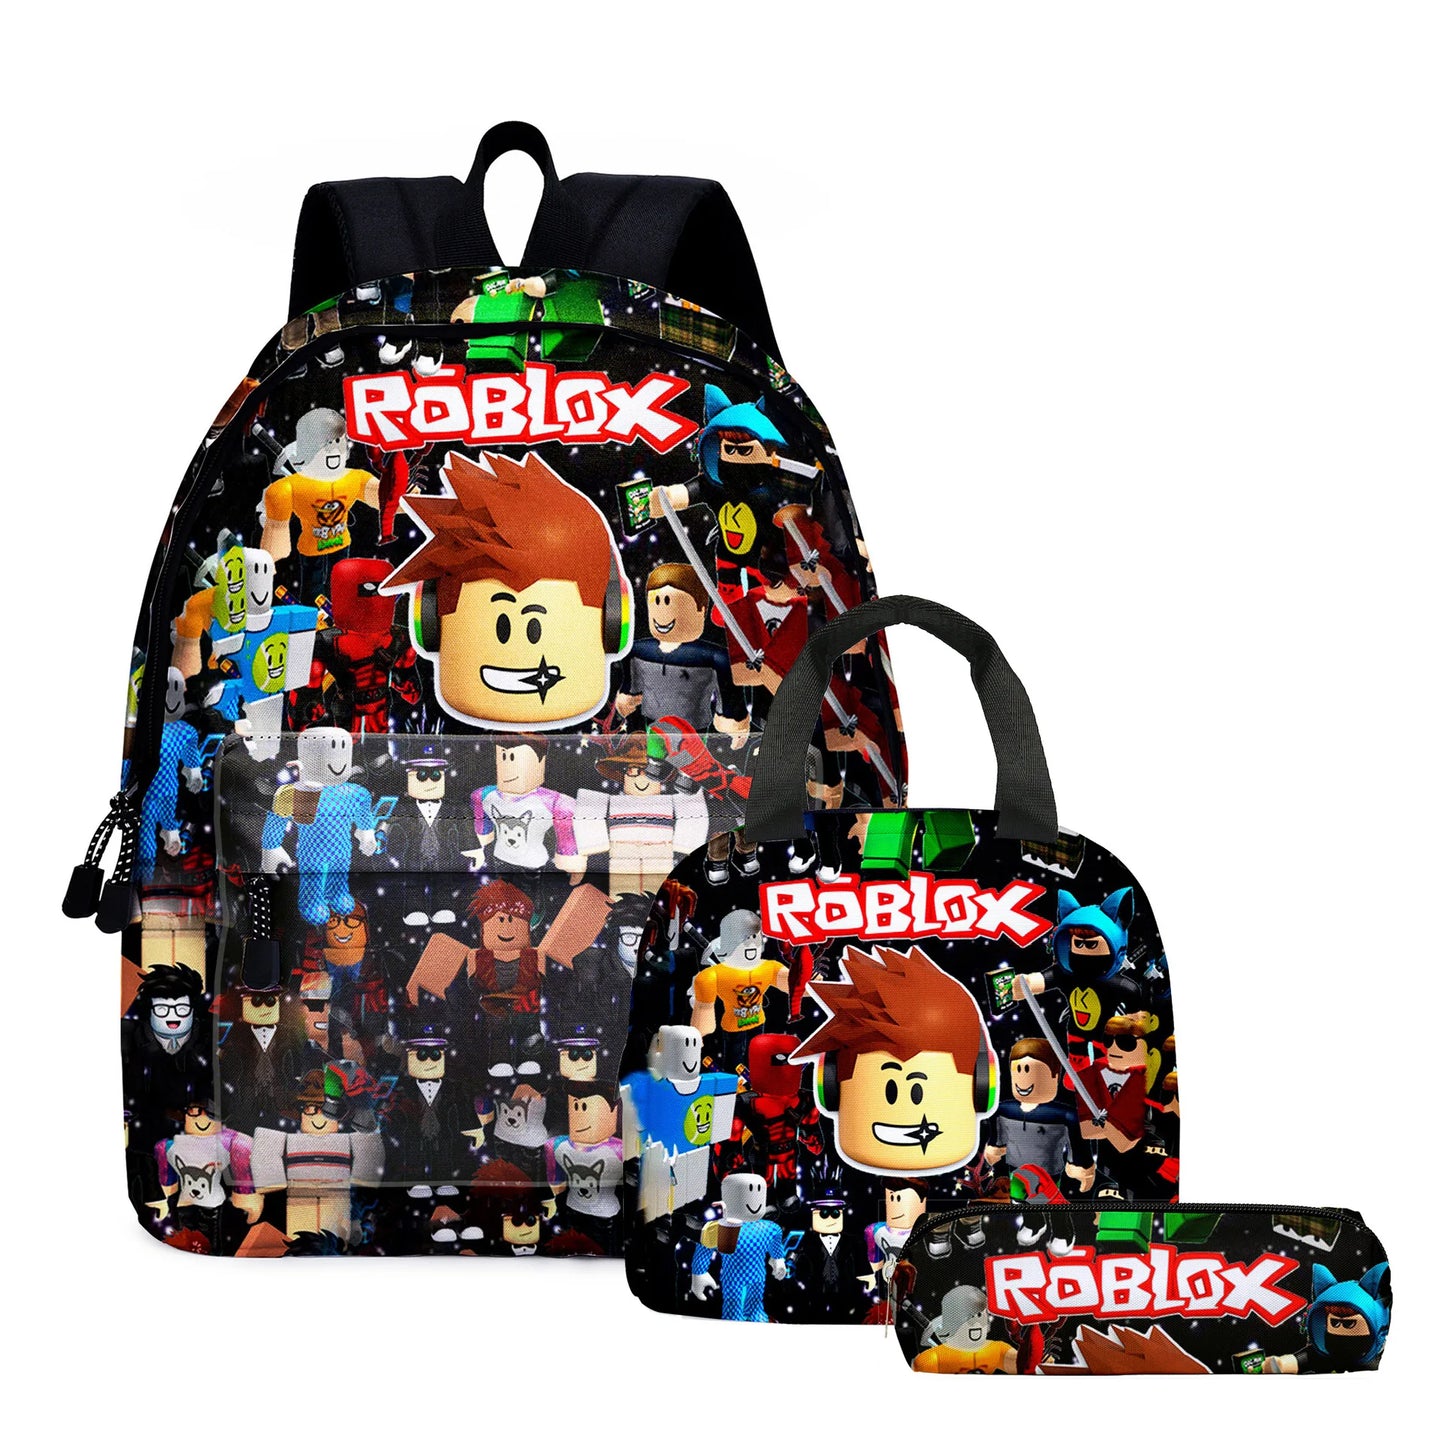 2/3PC-SET Cartoon Animation Cross-border Game Roblox Primary and Secondary School Students Schoolbag Children's Backpack